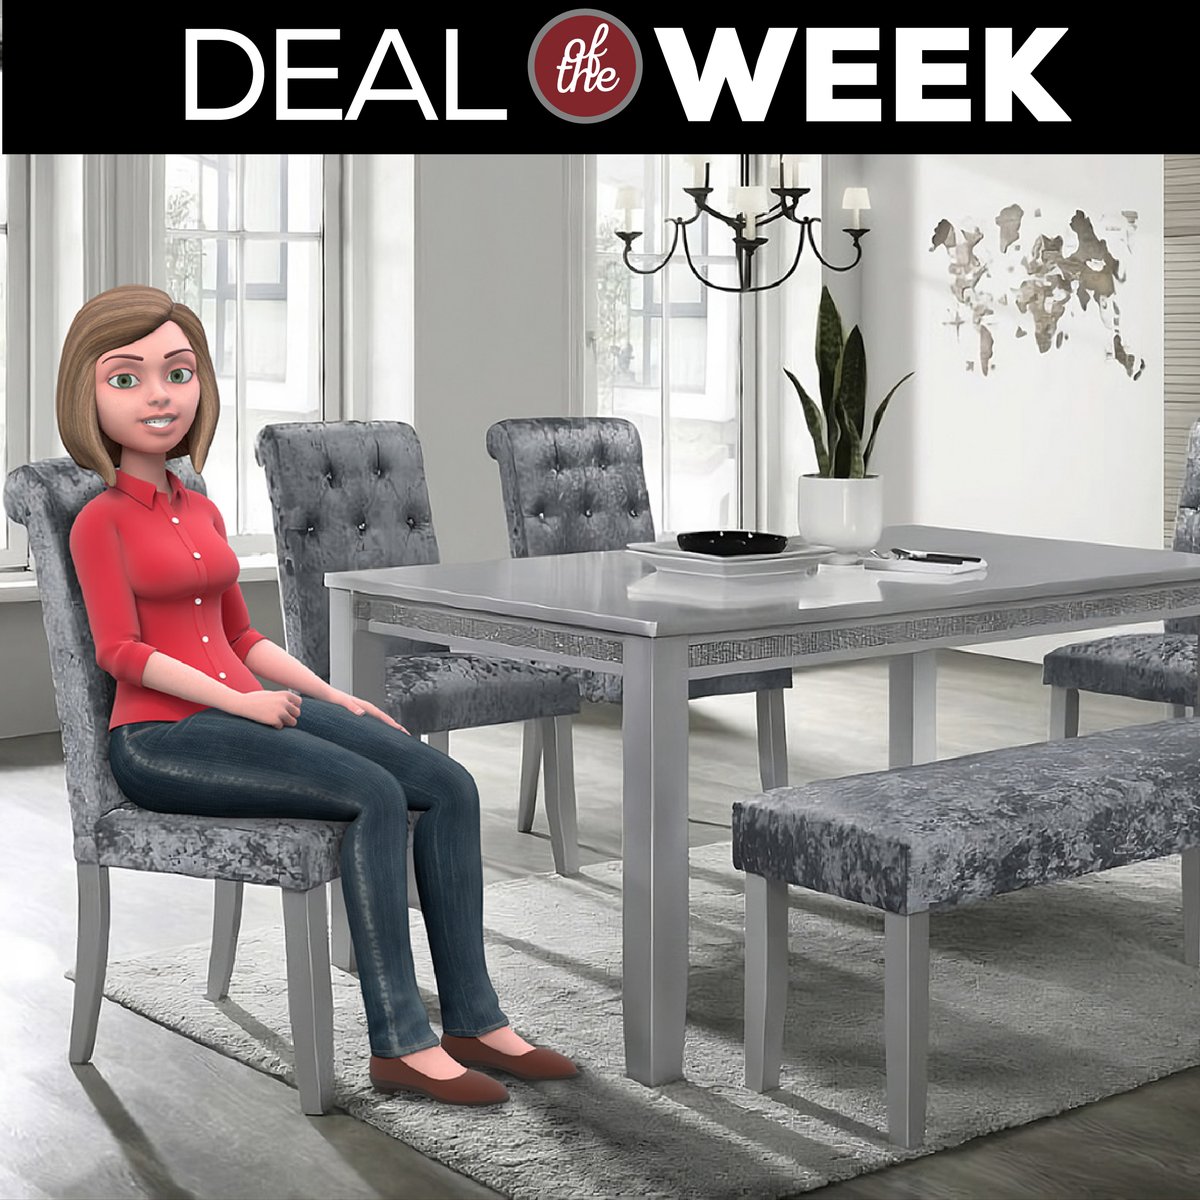 The Deal of the Week is the Vela Dining Table with 4 Chairs and Bench for just $699 - now through May 20th - while supplies last. 
bit.ly/3Ut6okB
#dock86 #thedockprice #deals #everydaydeals #dow #limitedtime #everydaylowprice #dealoftheweek #diningset #diningroom